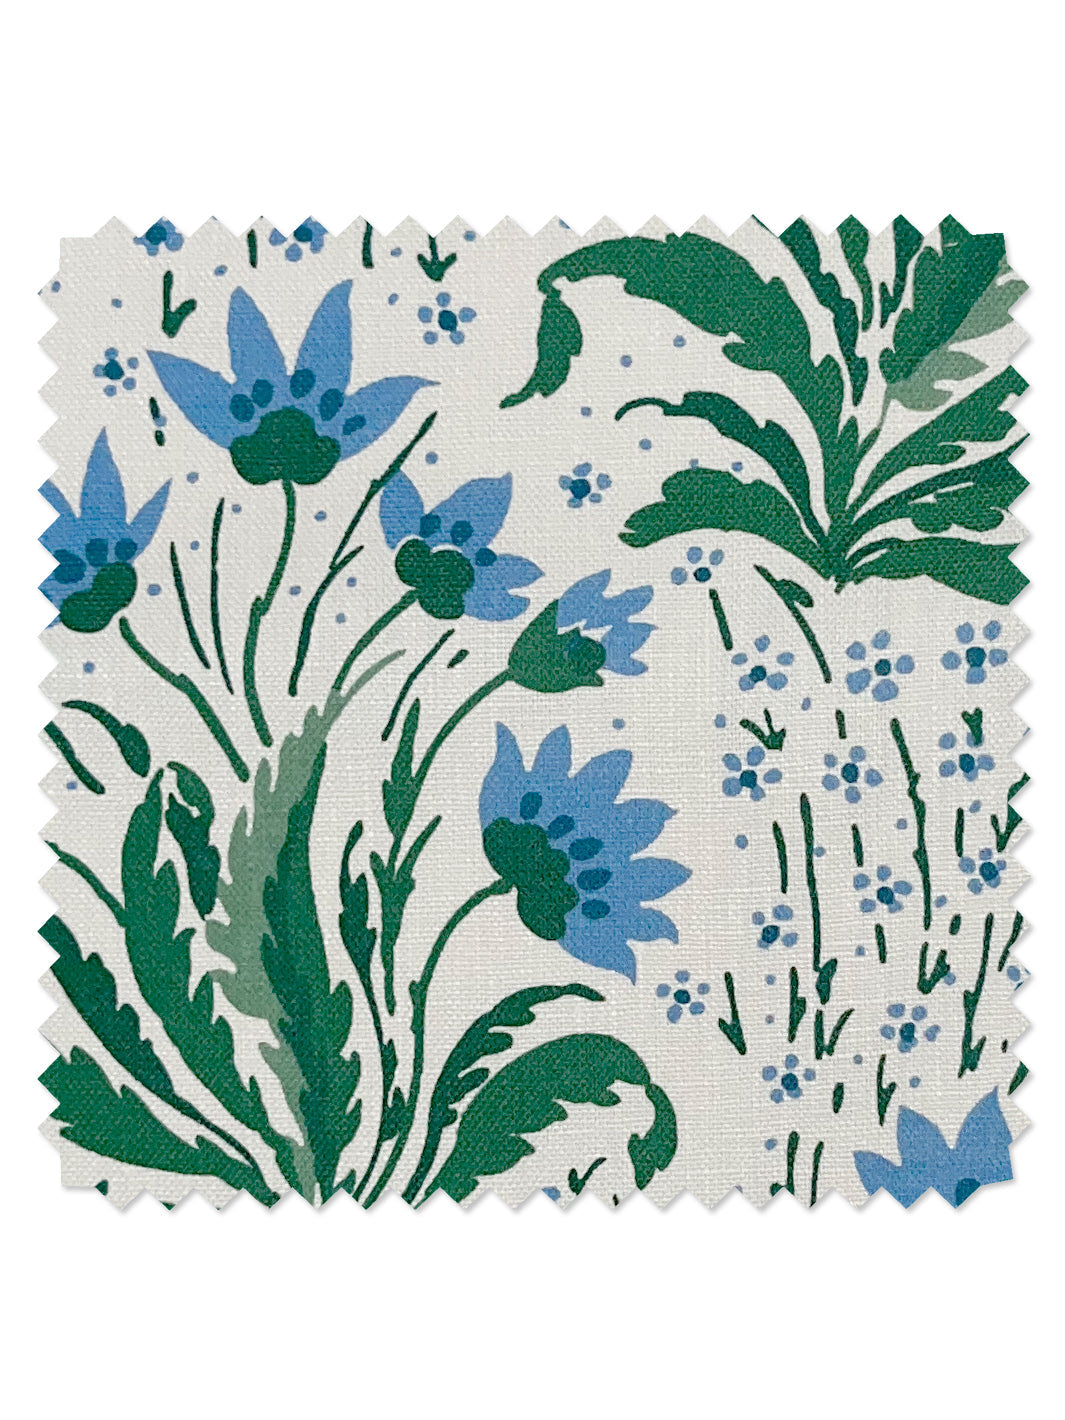 'Hillhouse Floral Multi' Linen Fabric by Nathan Turner - Blue Green